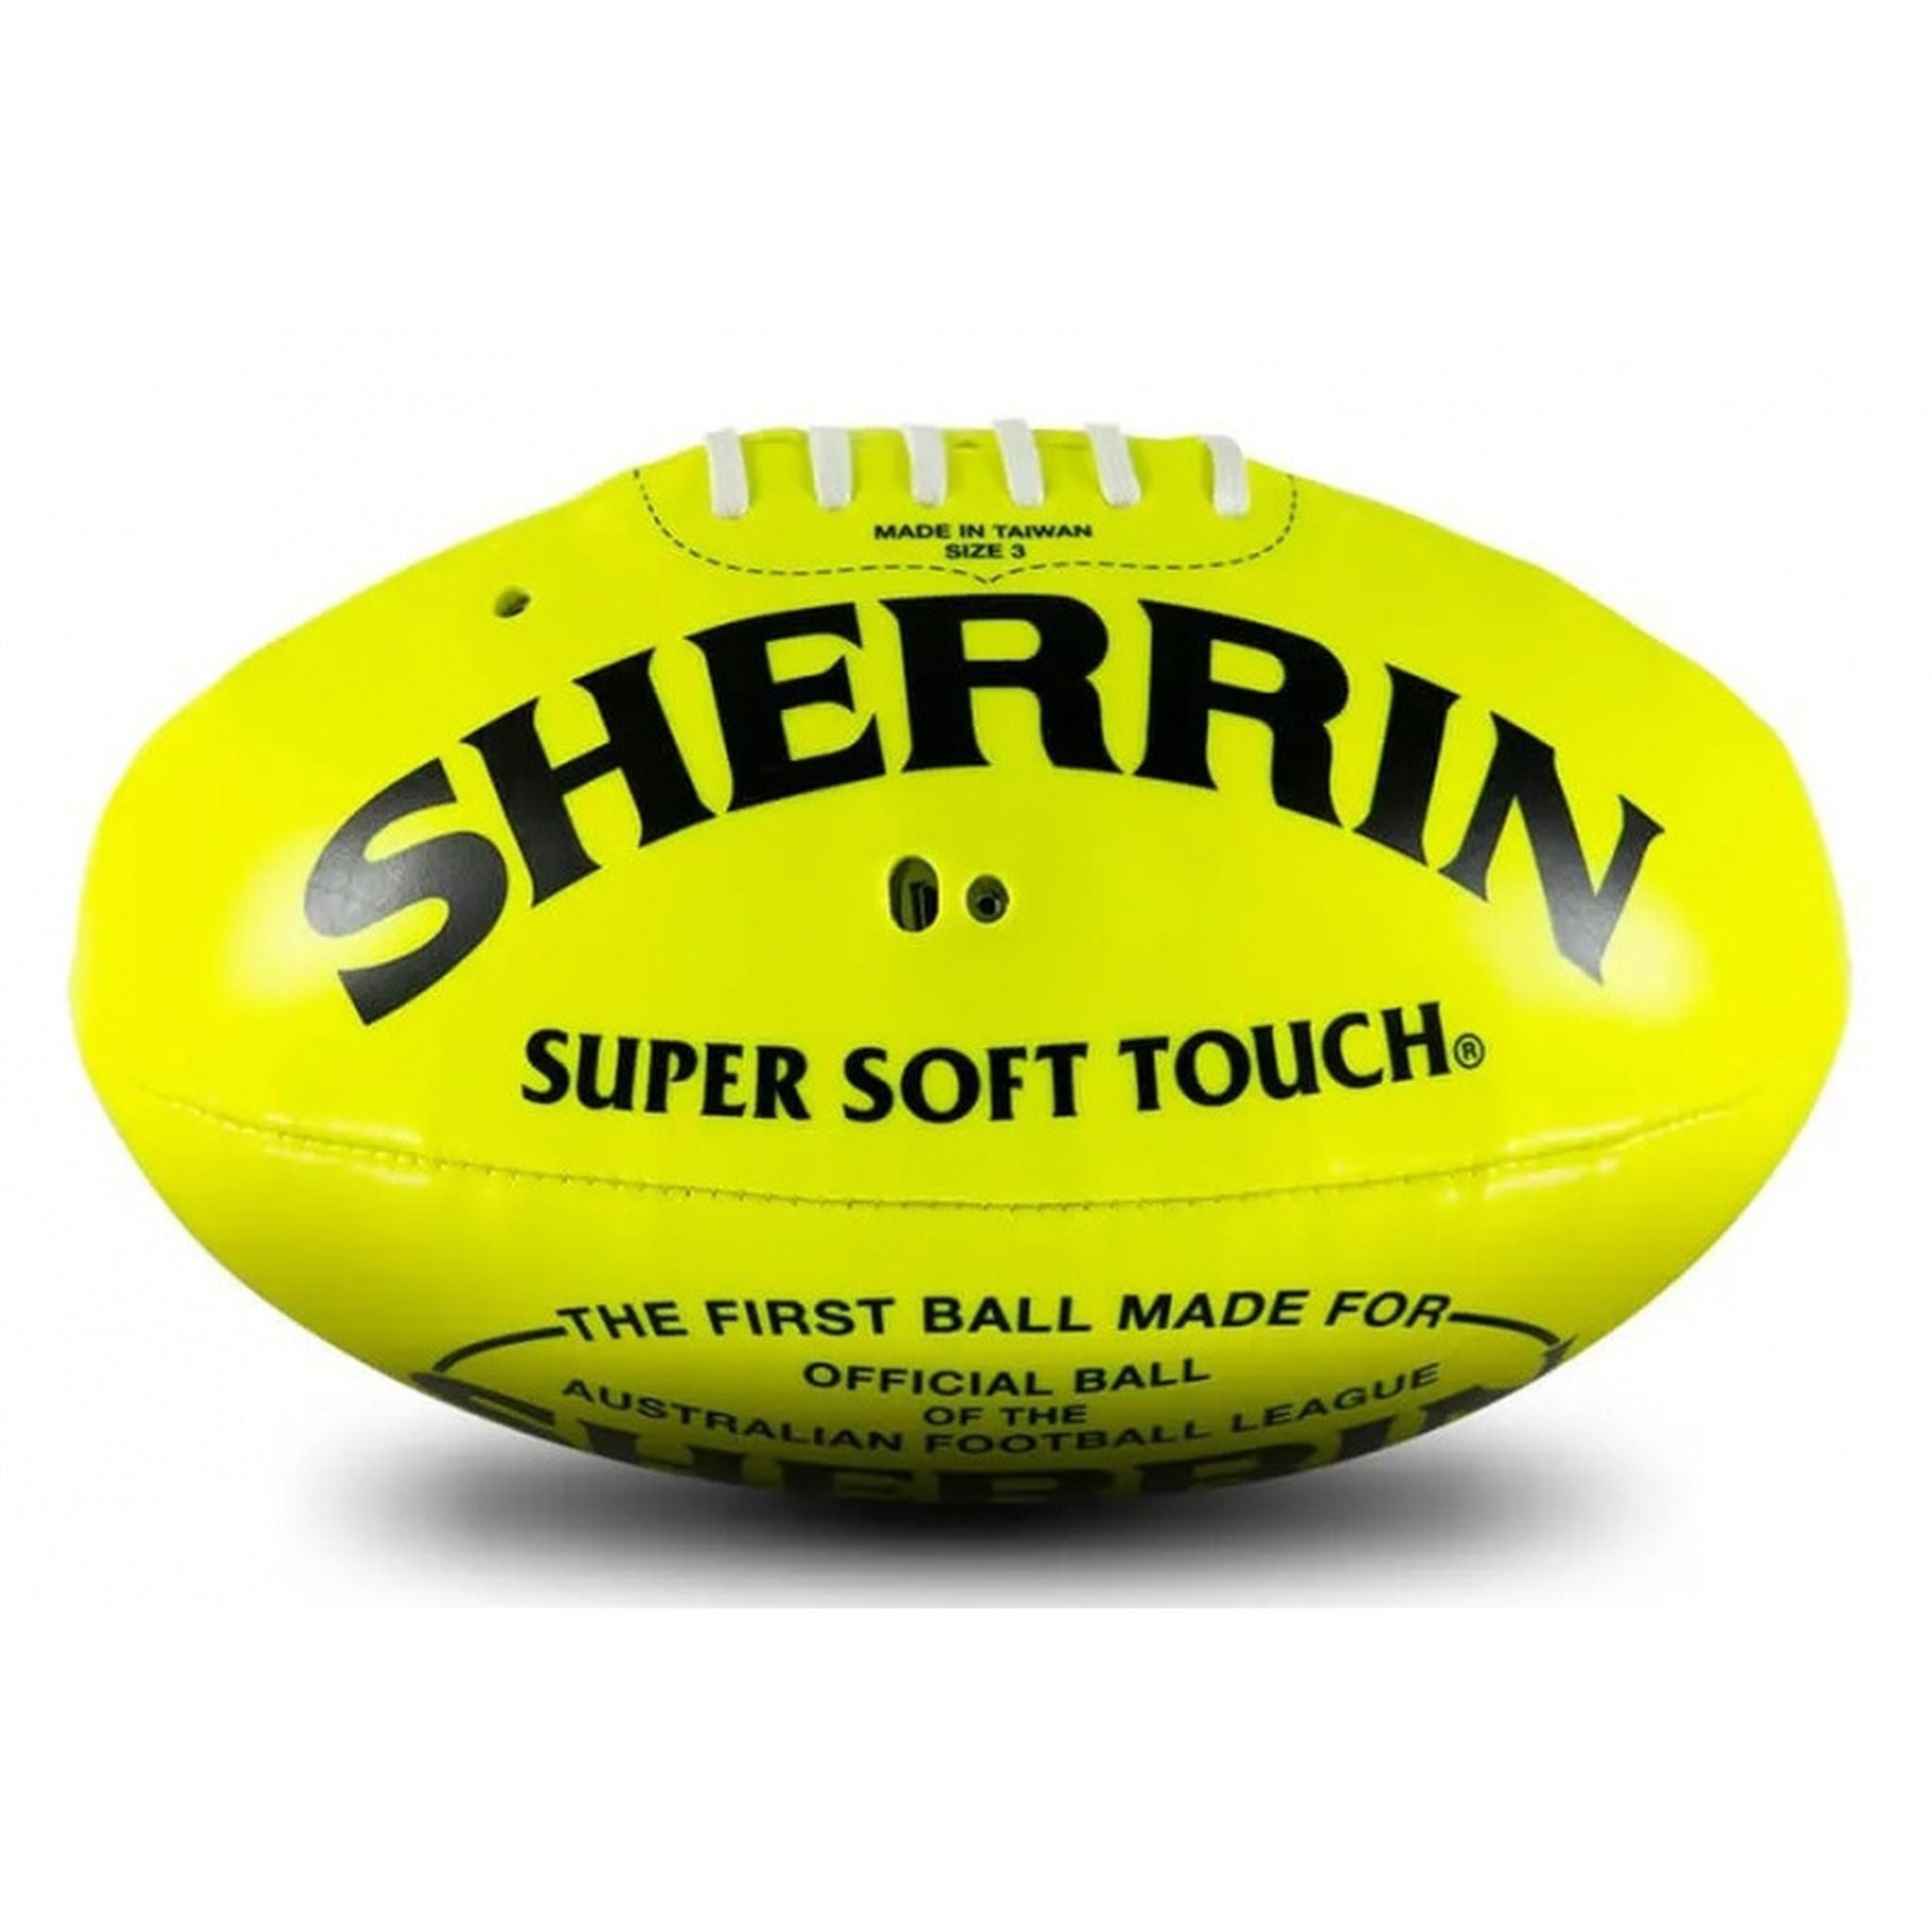 Sherrin Super Soft Touch Vision Impaired Football